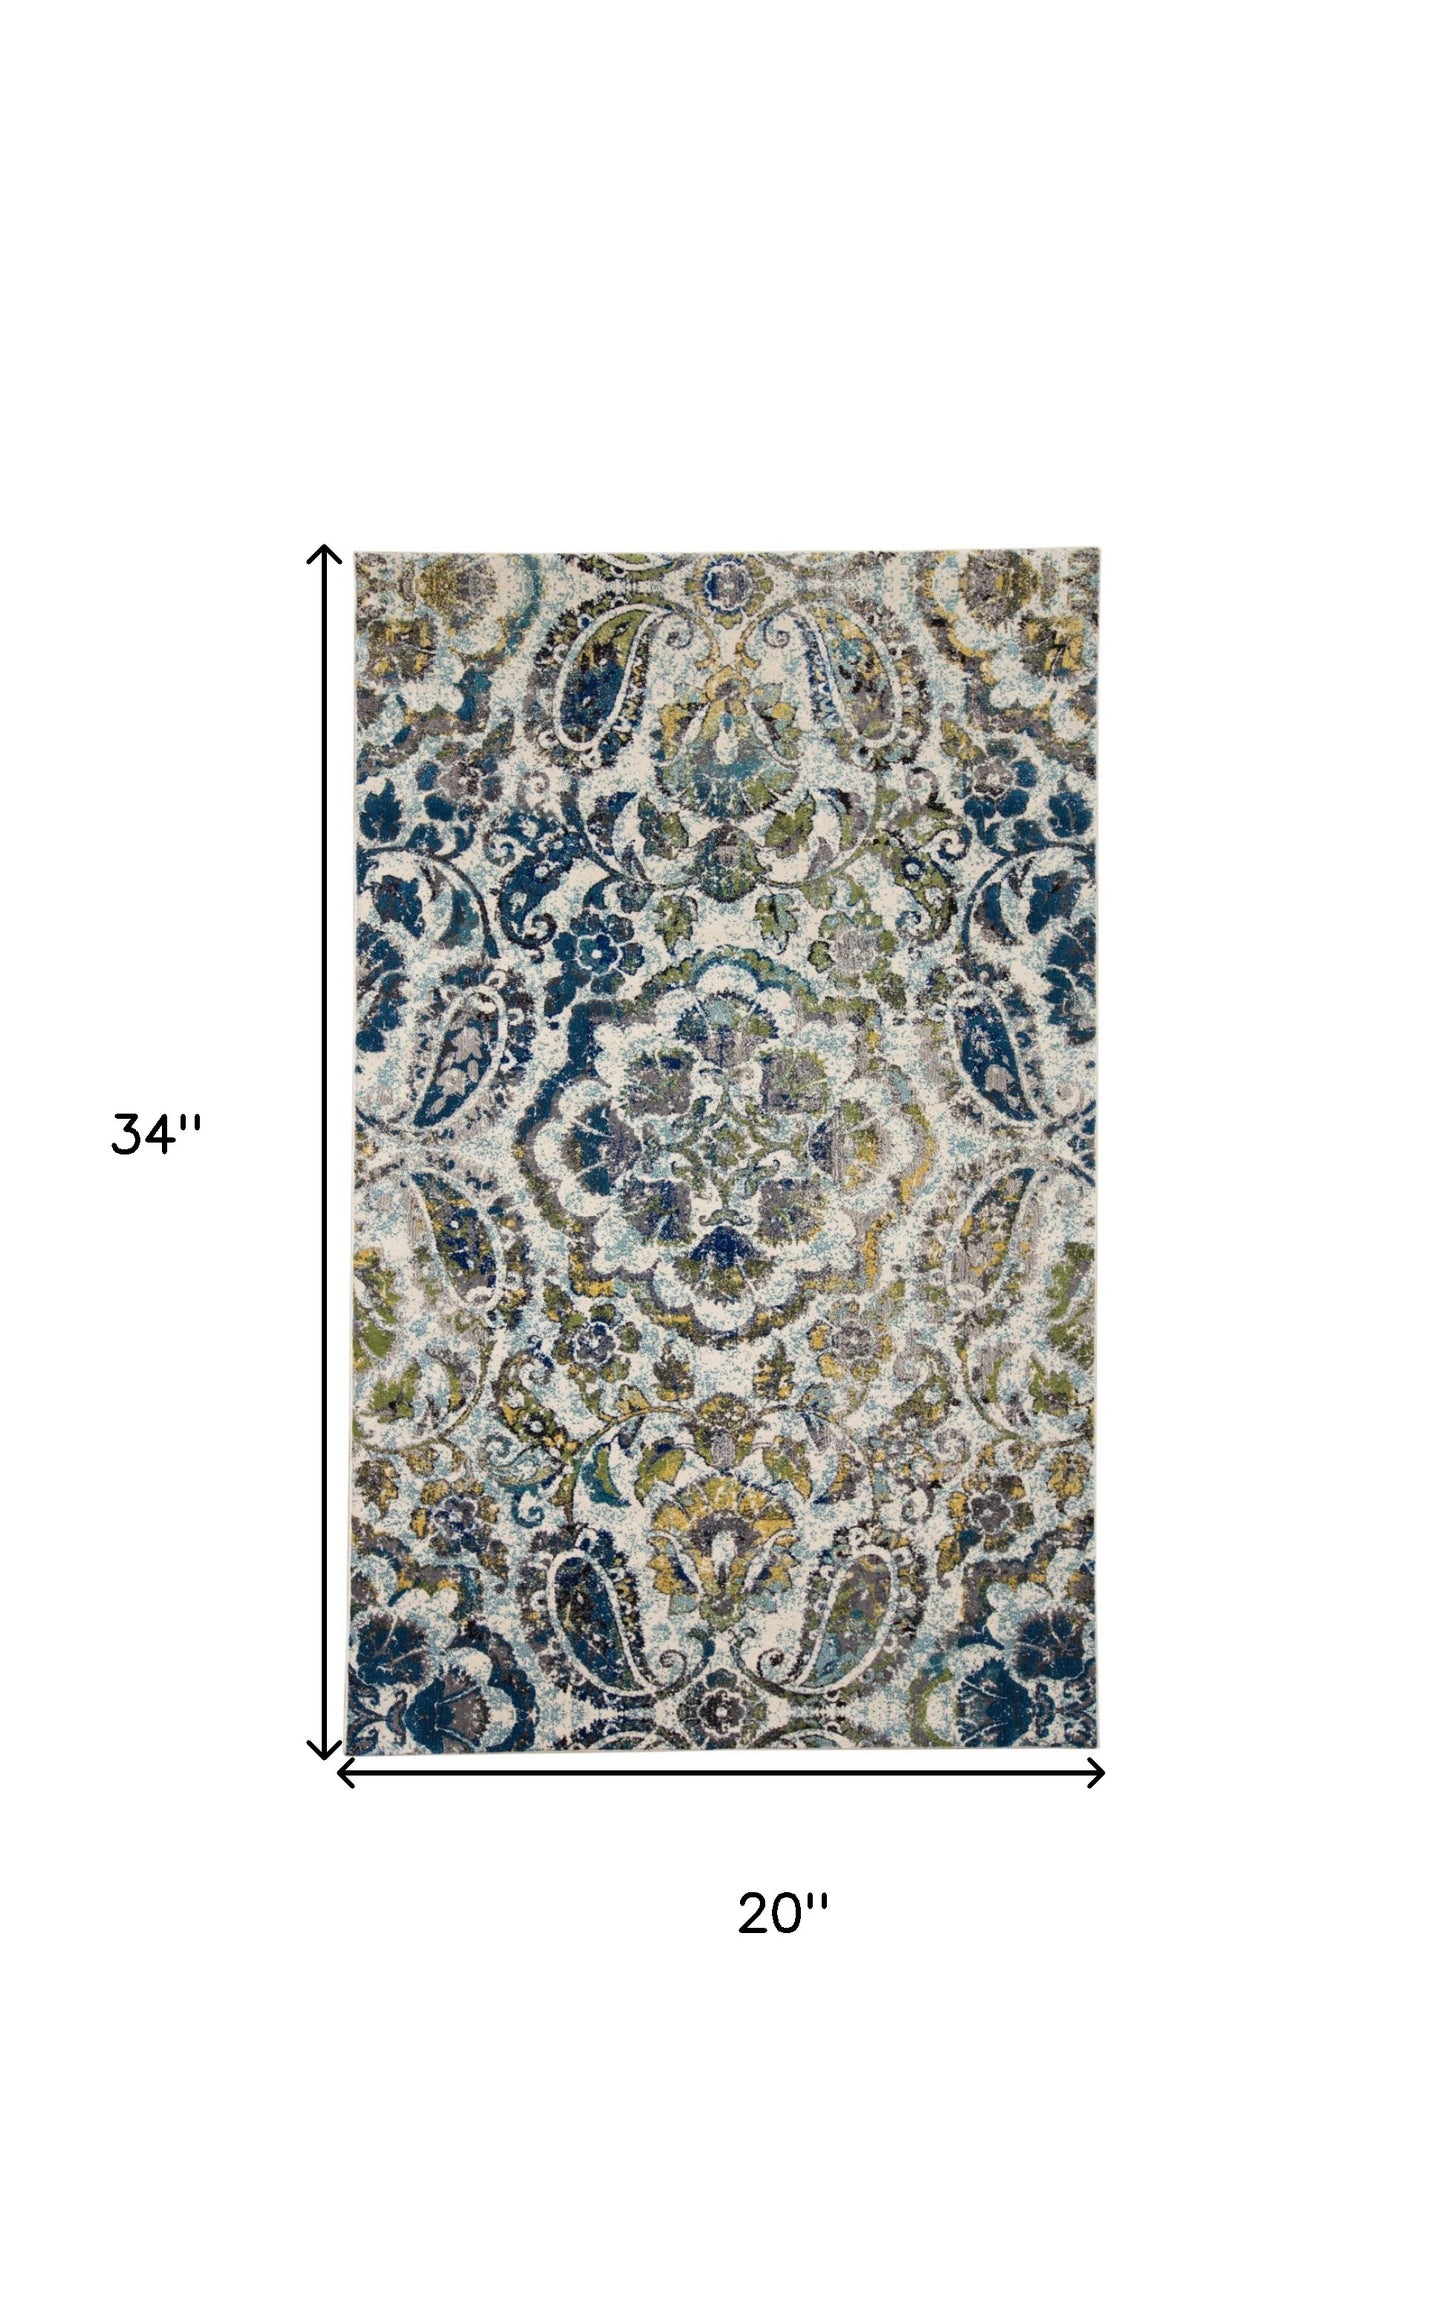 8' X 11' Ivory Blue And Green Floral Stain Resistant Area Rug